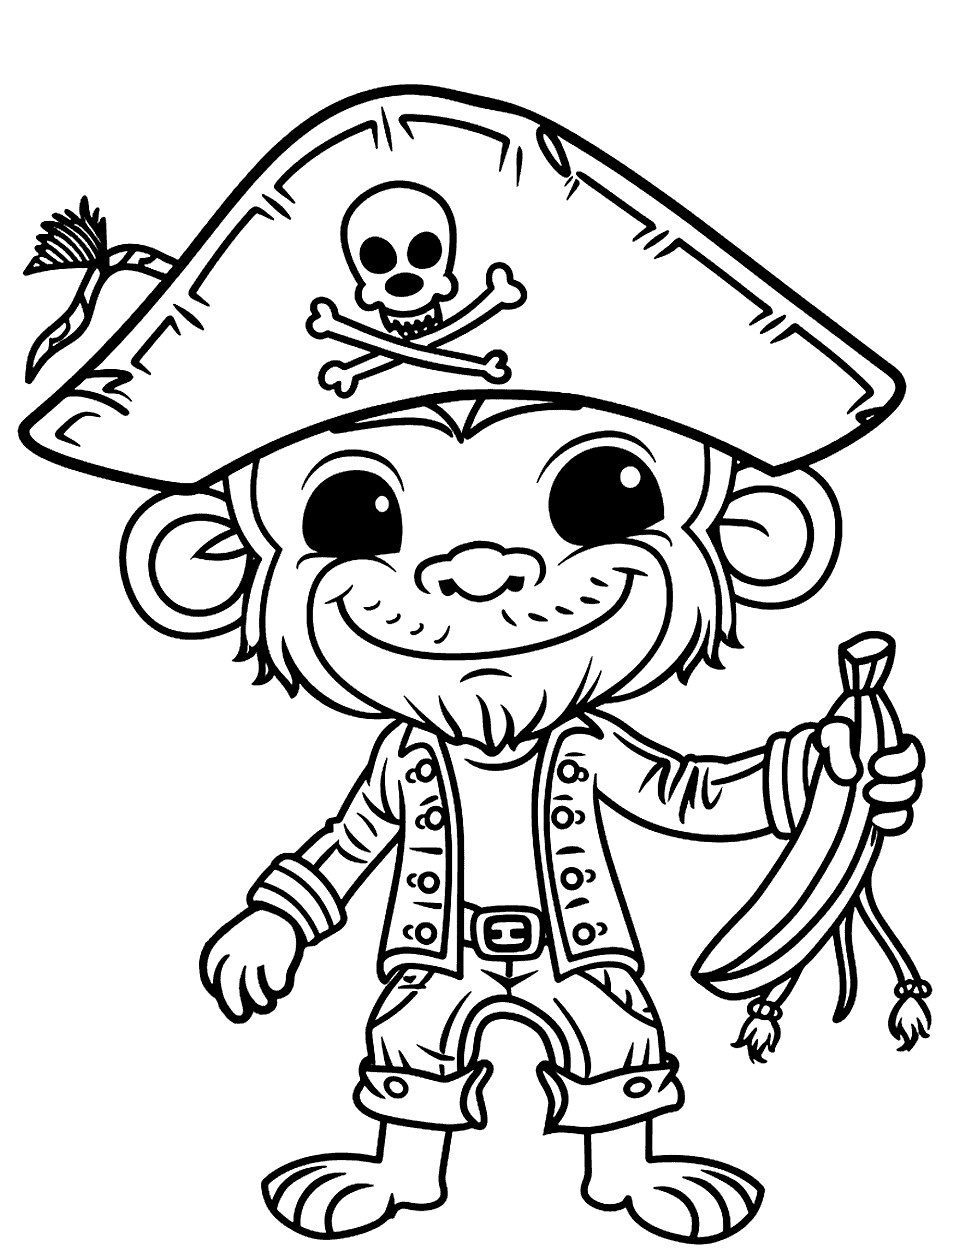 Pirate’s Pet Monkey Pirate Coloring Page - A cheeky monkey wearing a pirate hat, holding a banana.